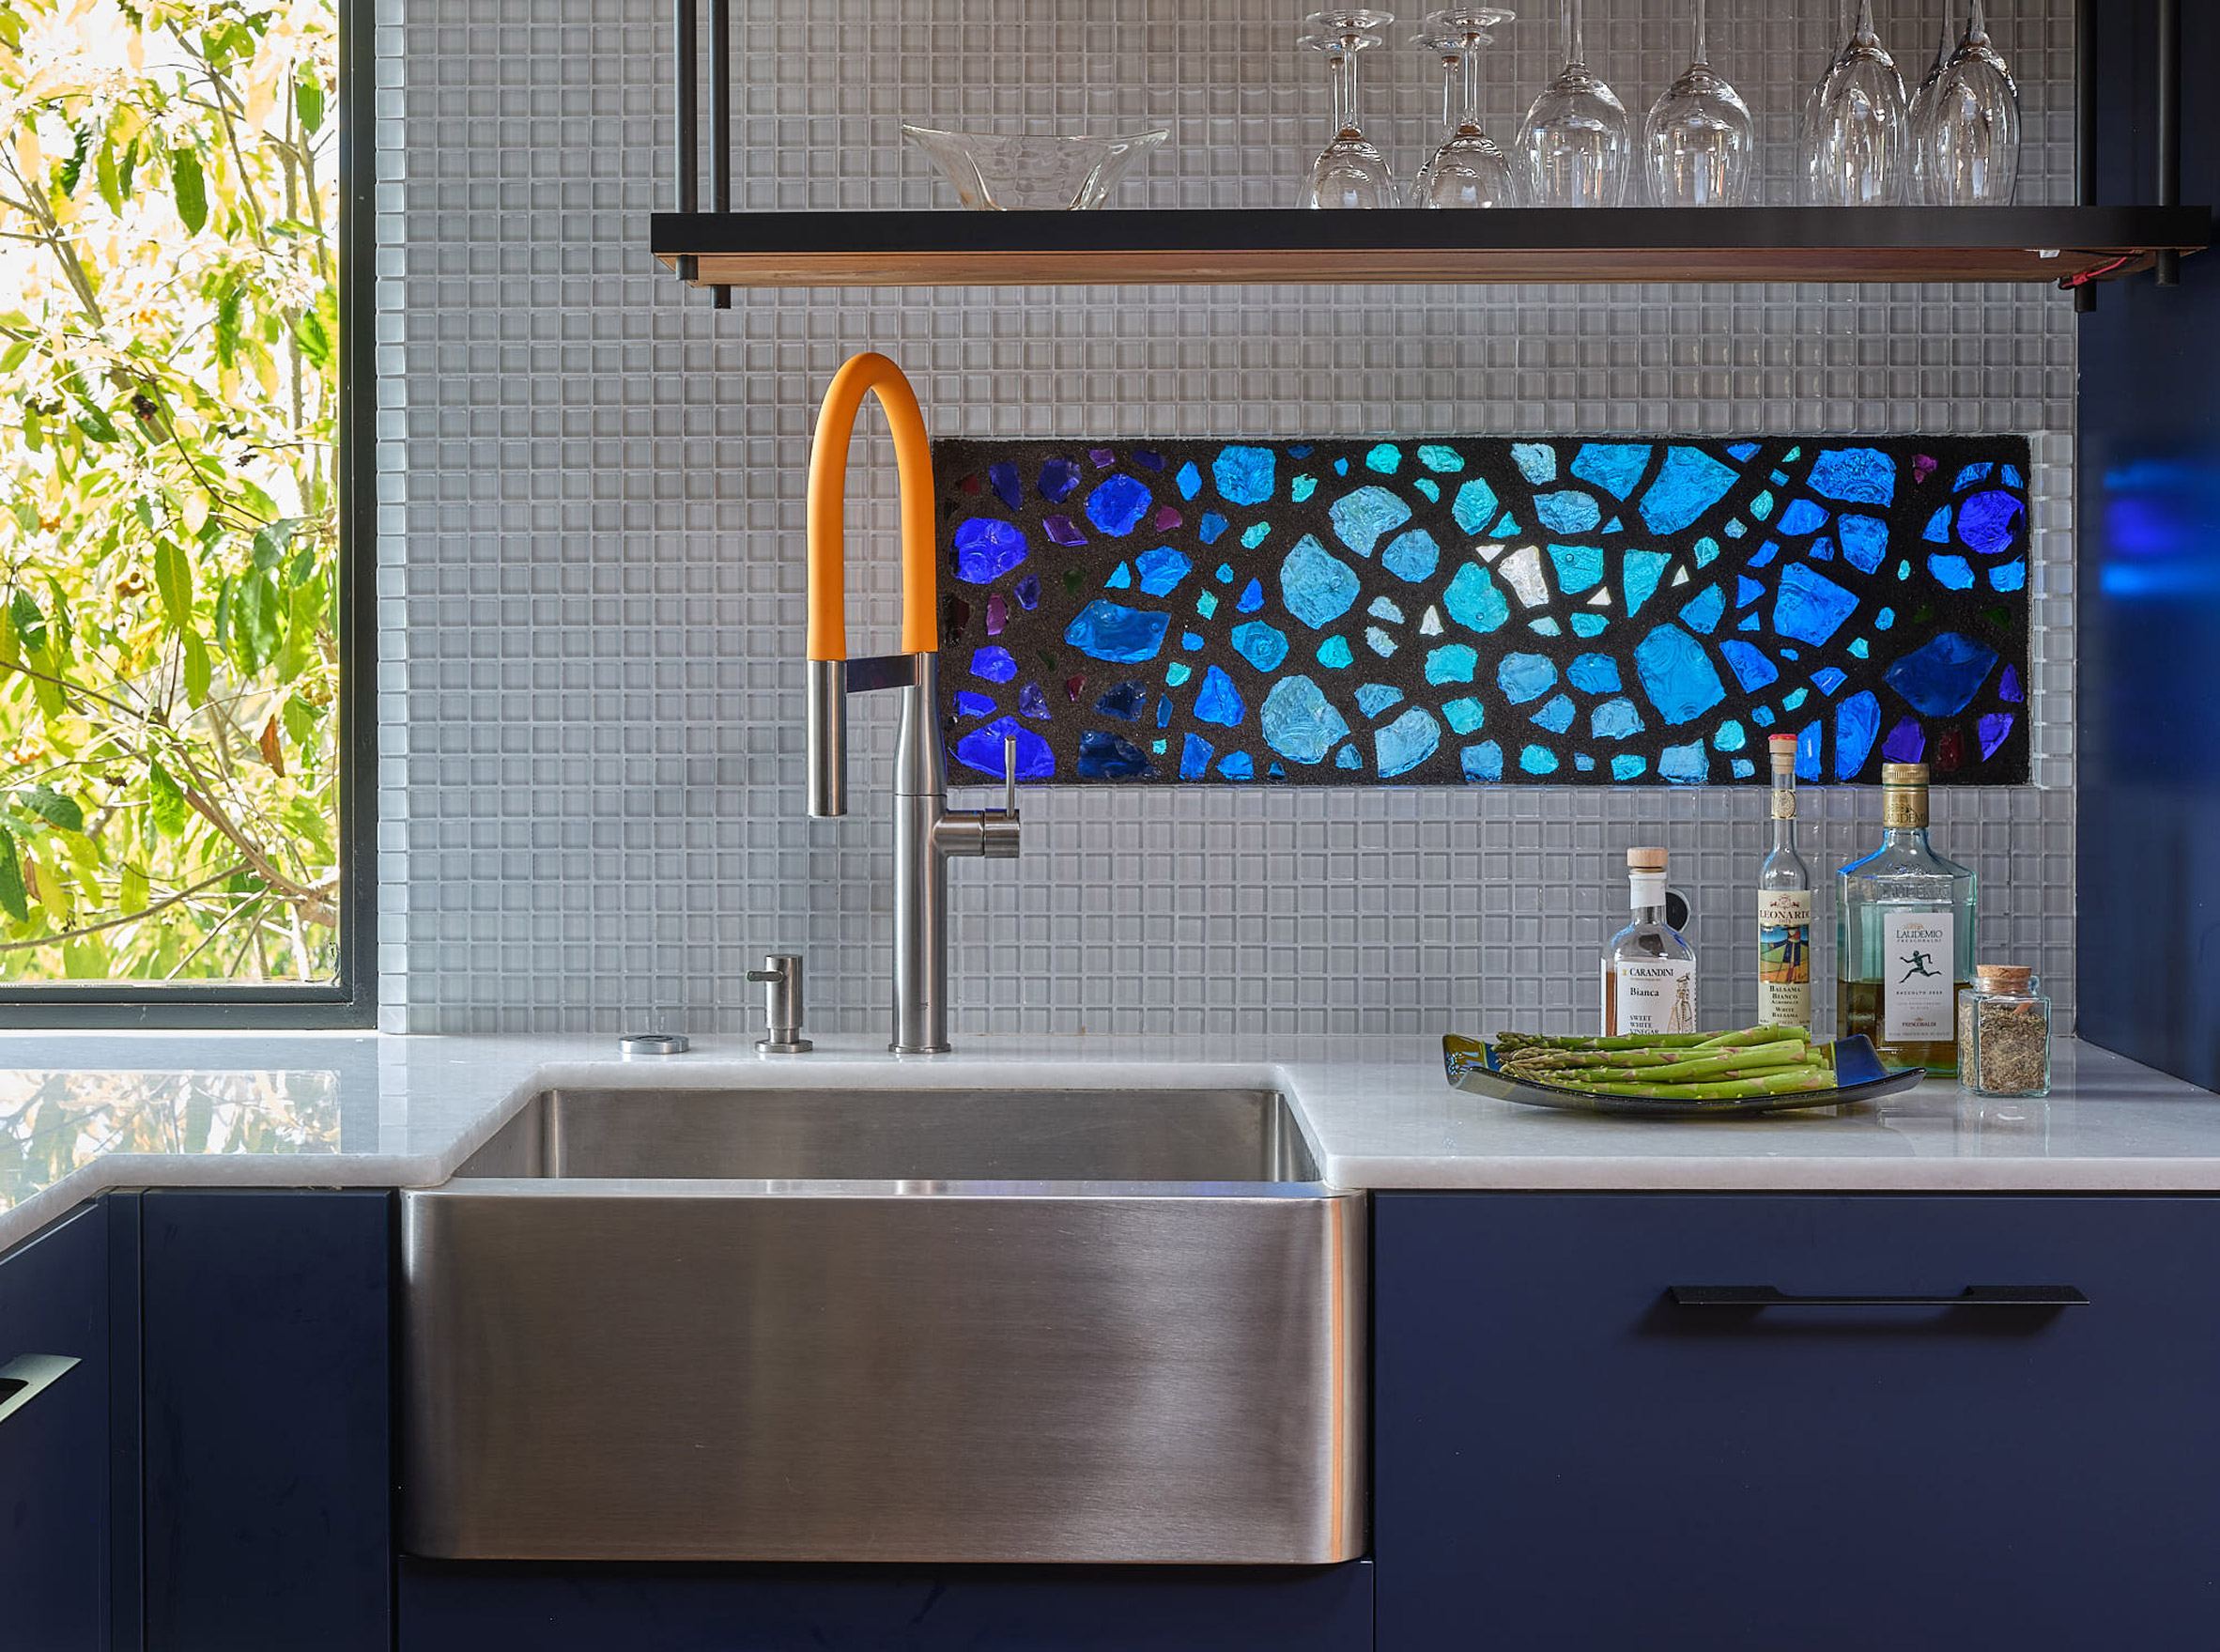 Stained glass in modernist home